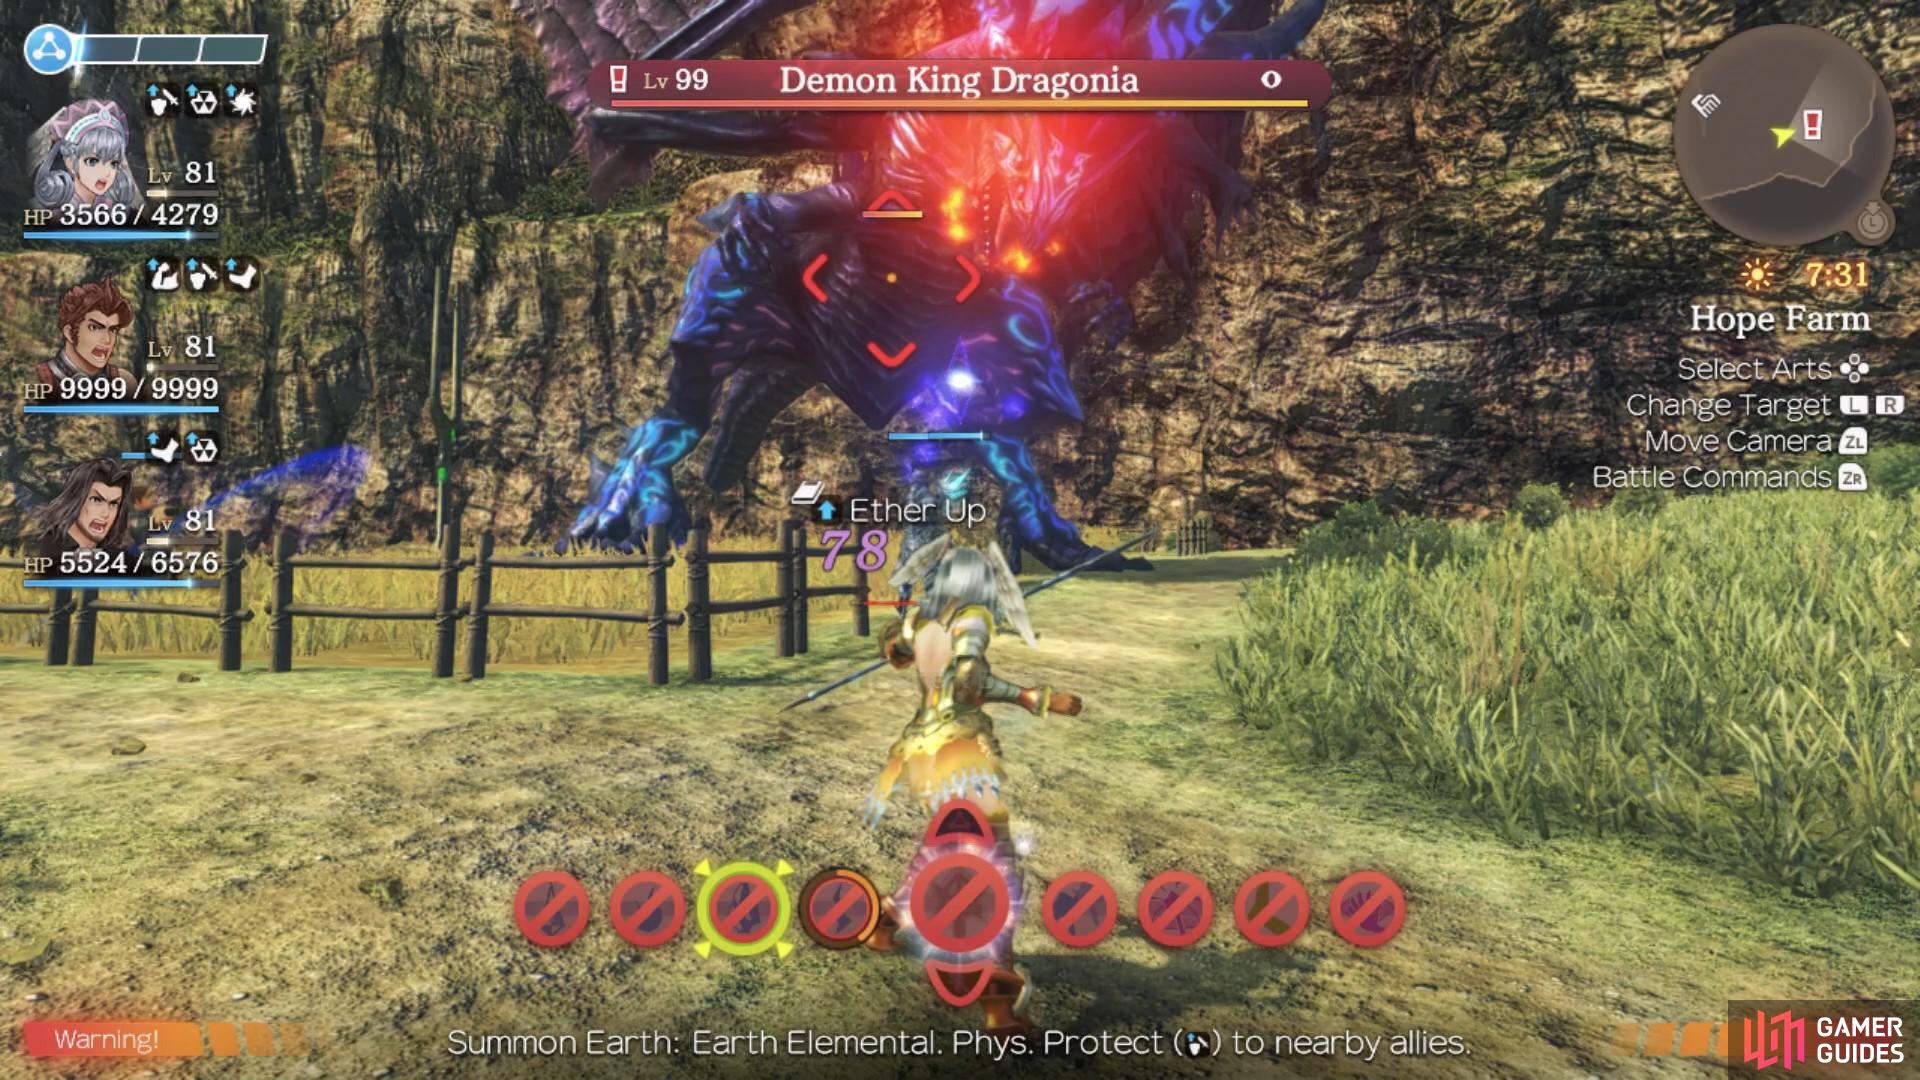 The Demon King Dragonia has  A LOT of health, so fighting him will take some time. 